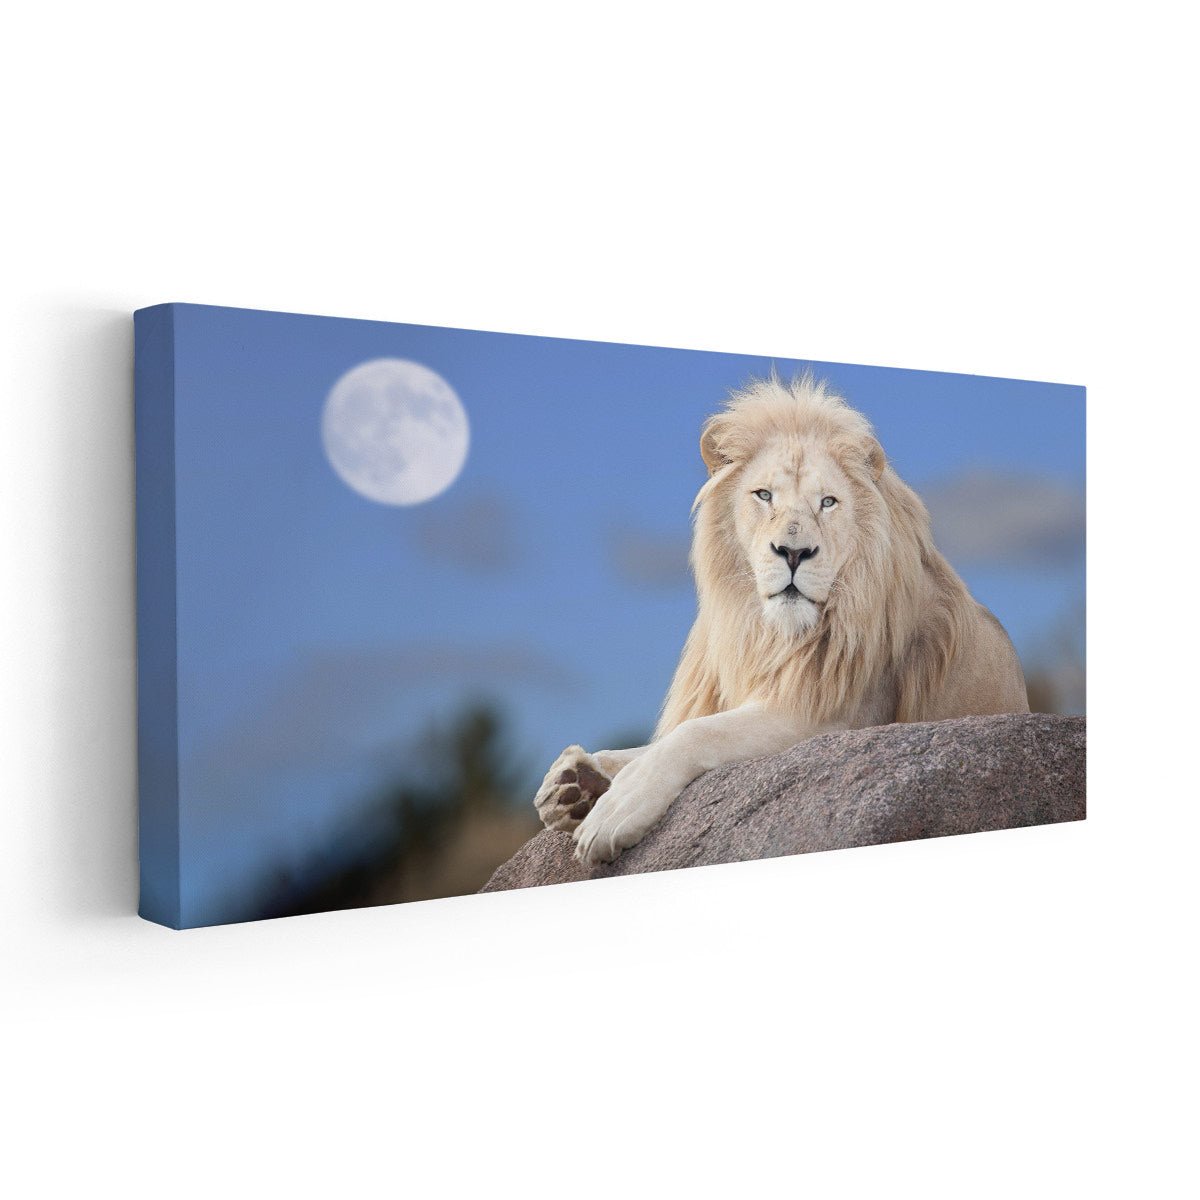 White Lion In Moon Light Canvas Wall Art